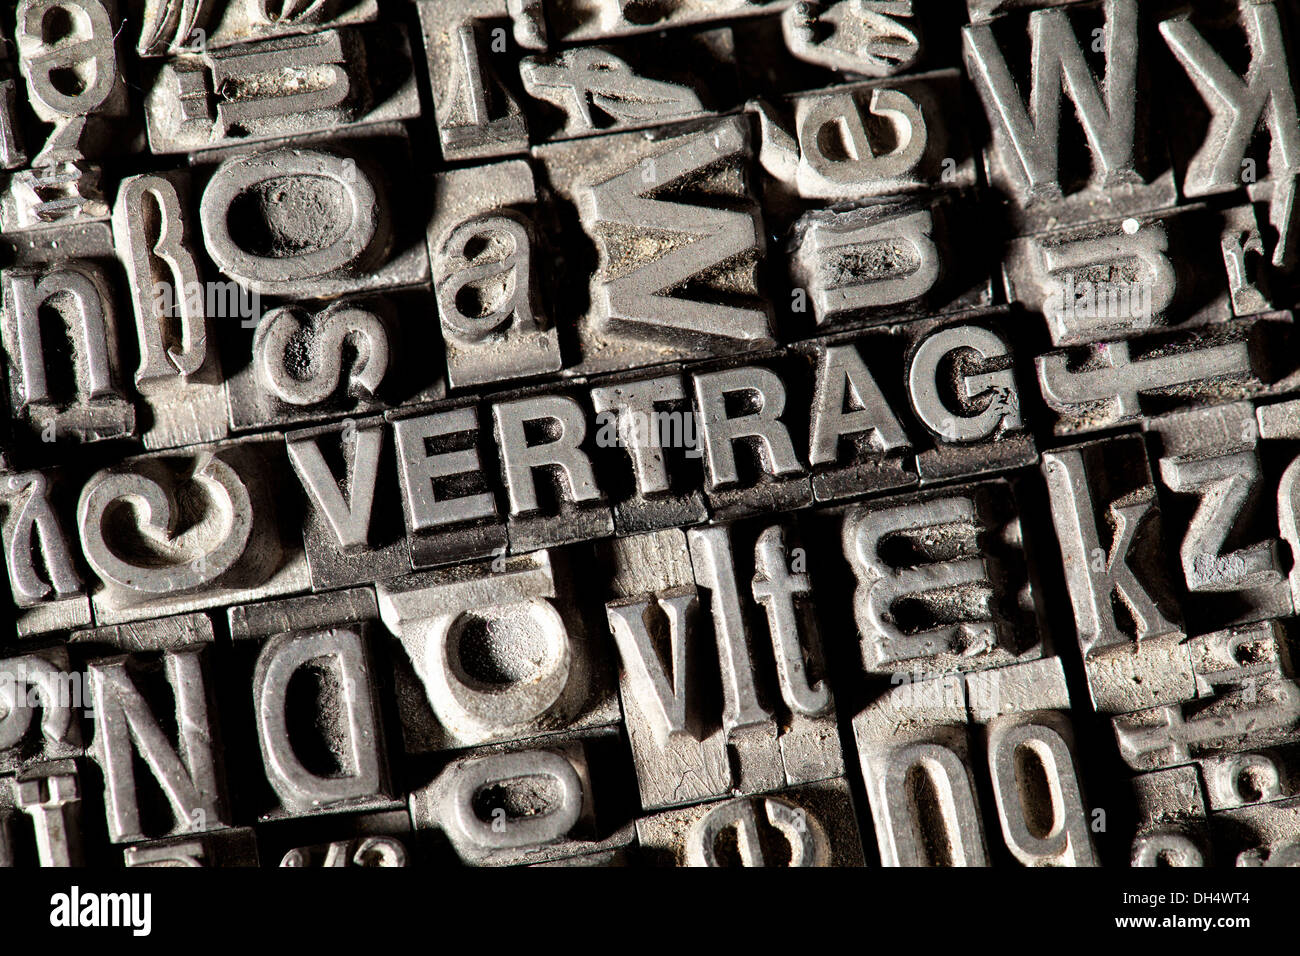 Old lead letters forming the word VERTRAG, German for contract Stock Photo